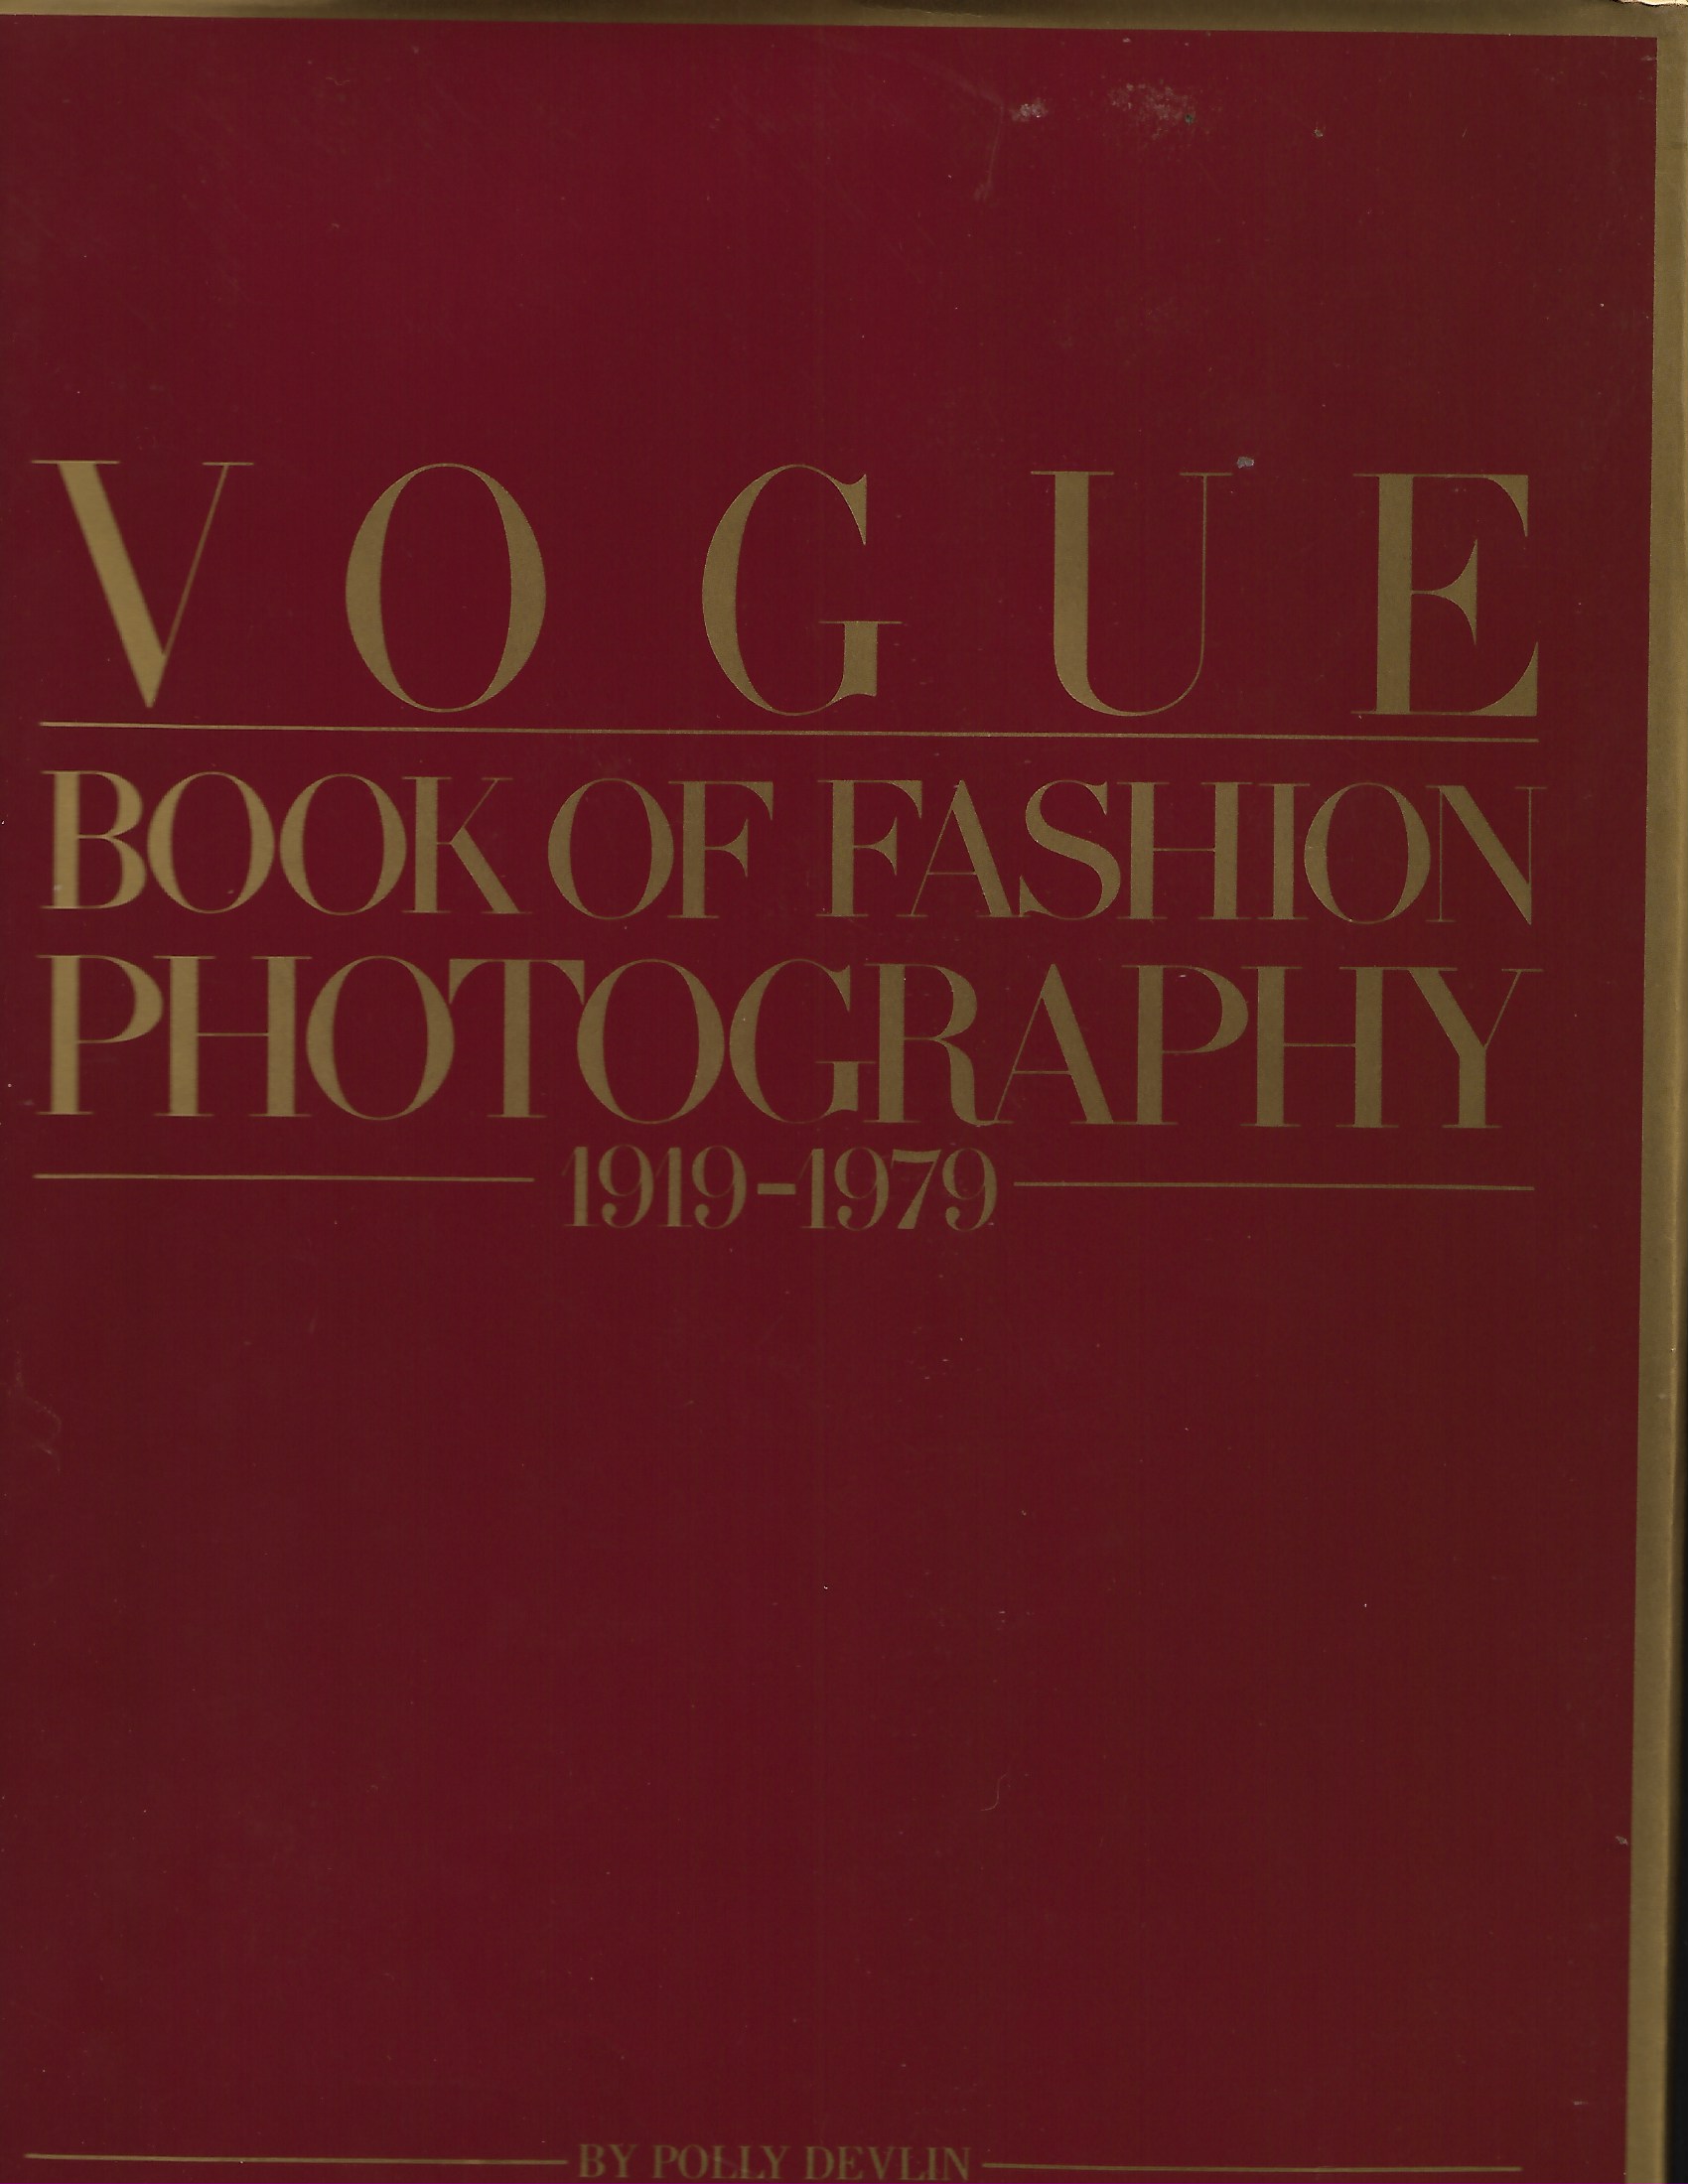 Vogue Book of Fashion Photography 1919 - 1979